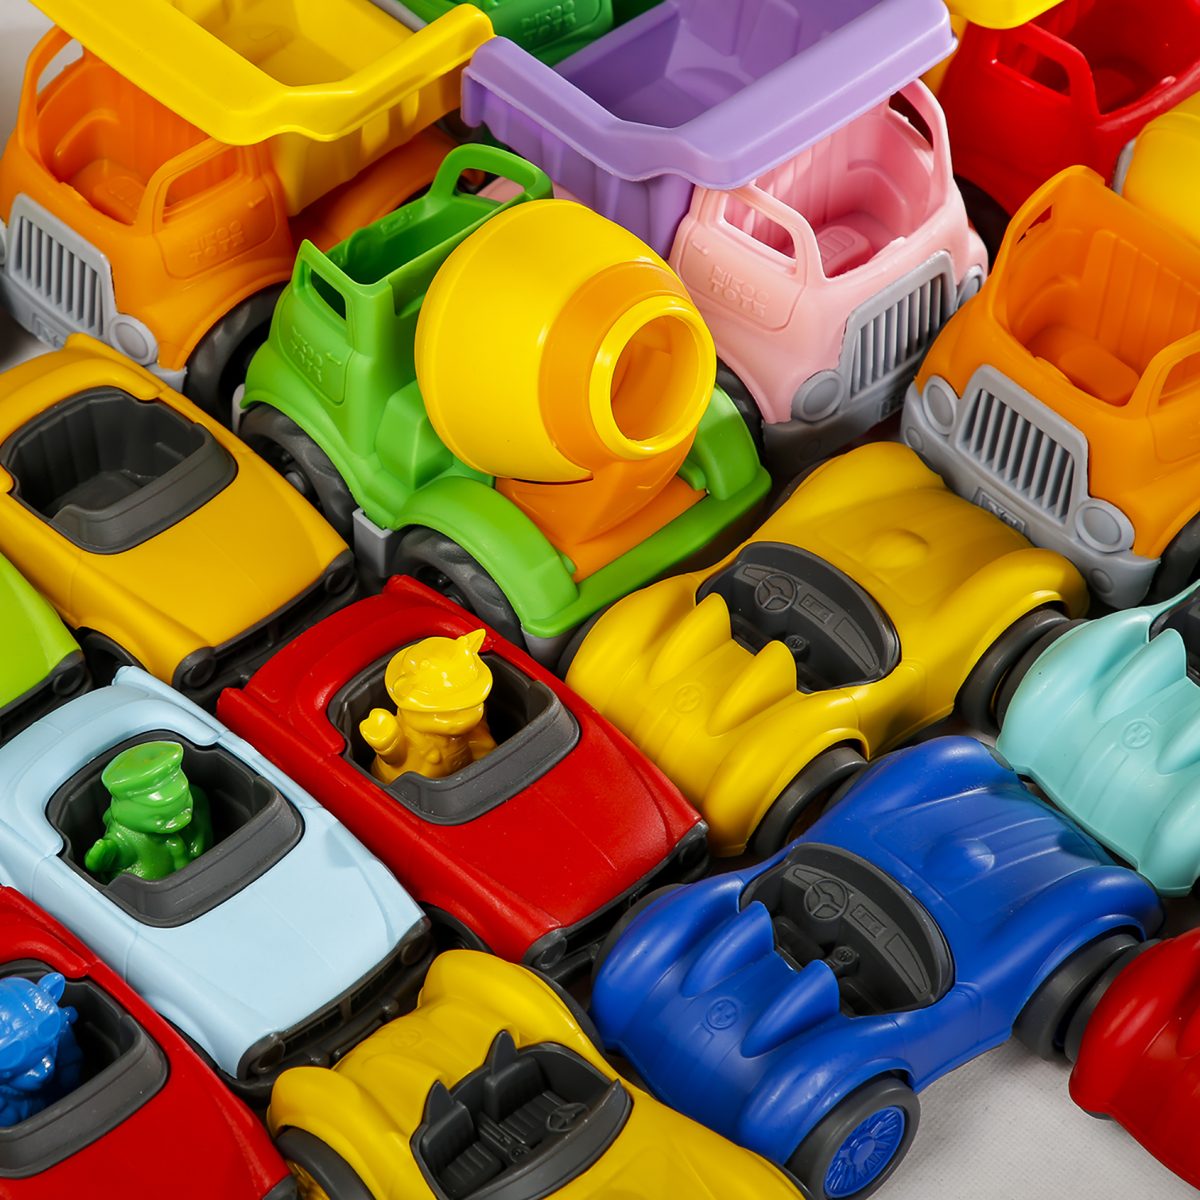 Types of toy cars